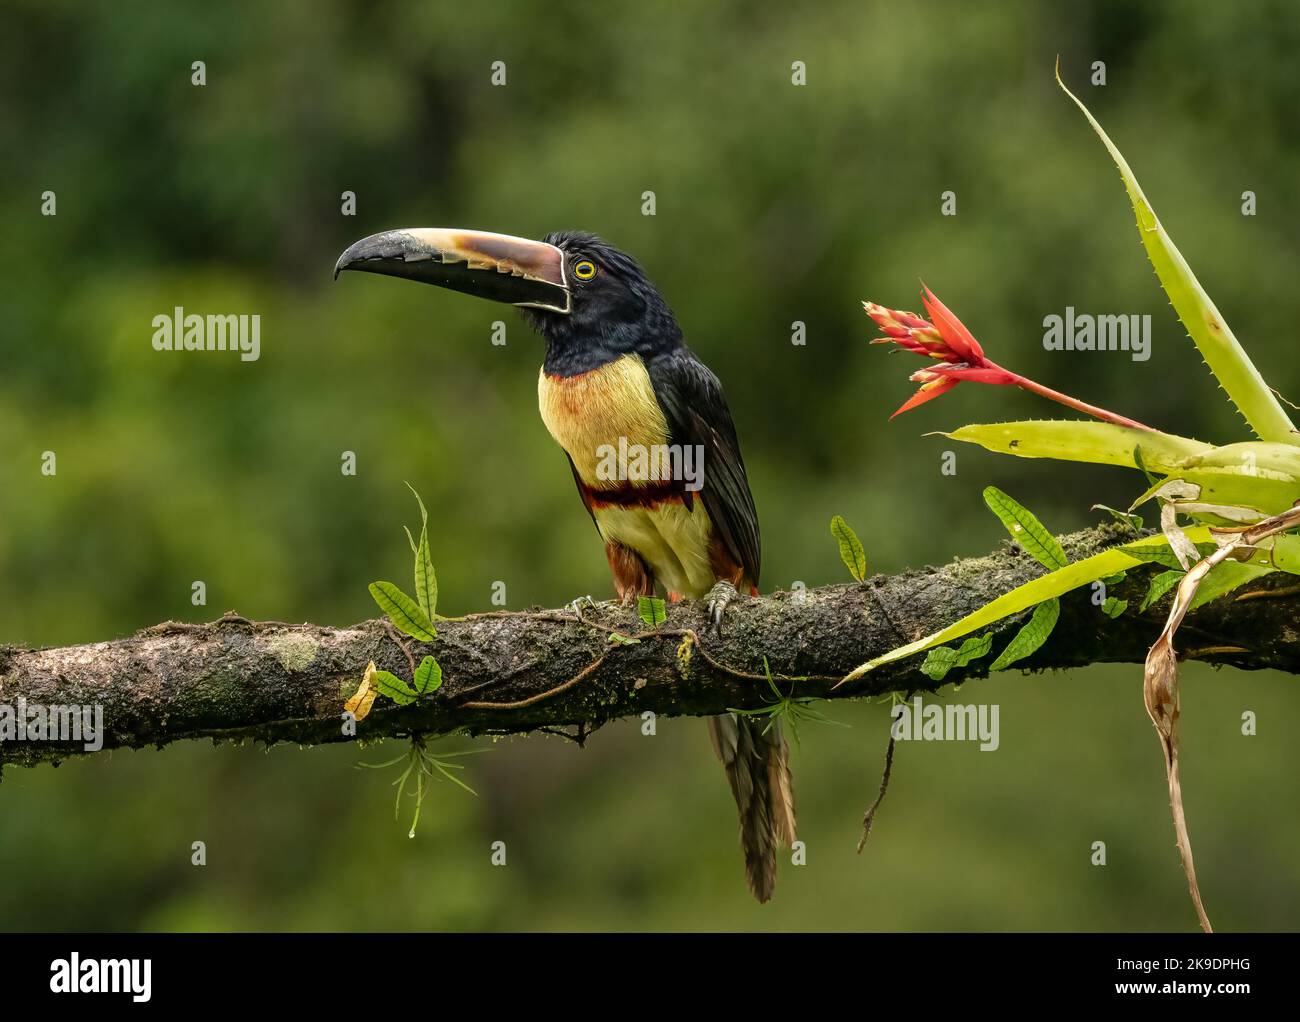 This Collared Aracari resting next to  bromeliad in the rainforest Stock Photo